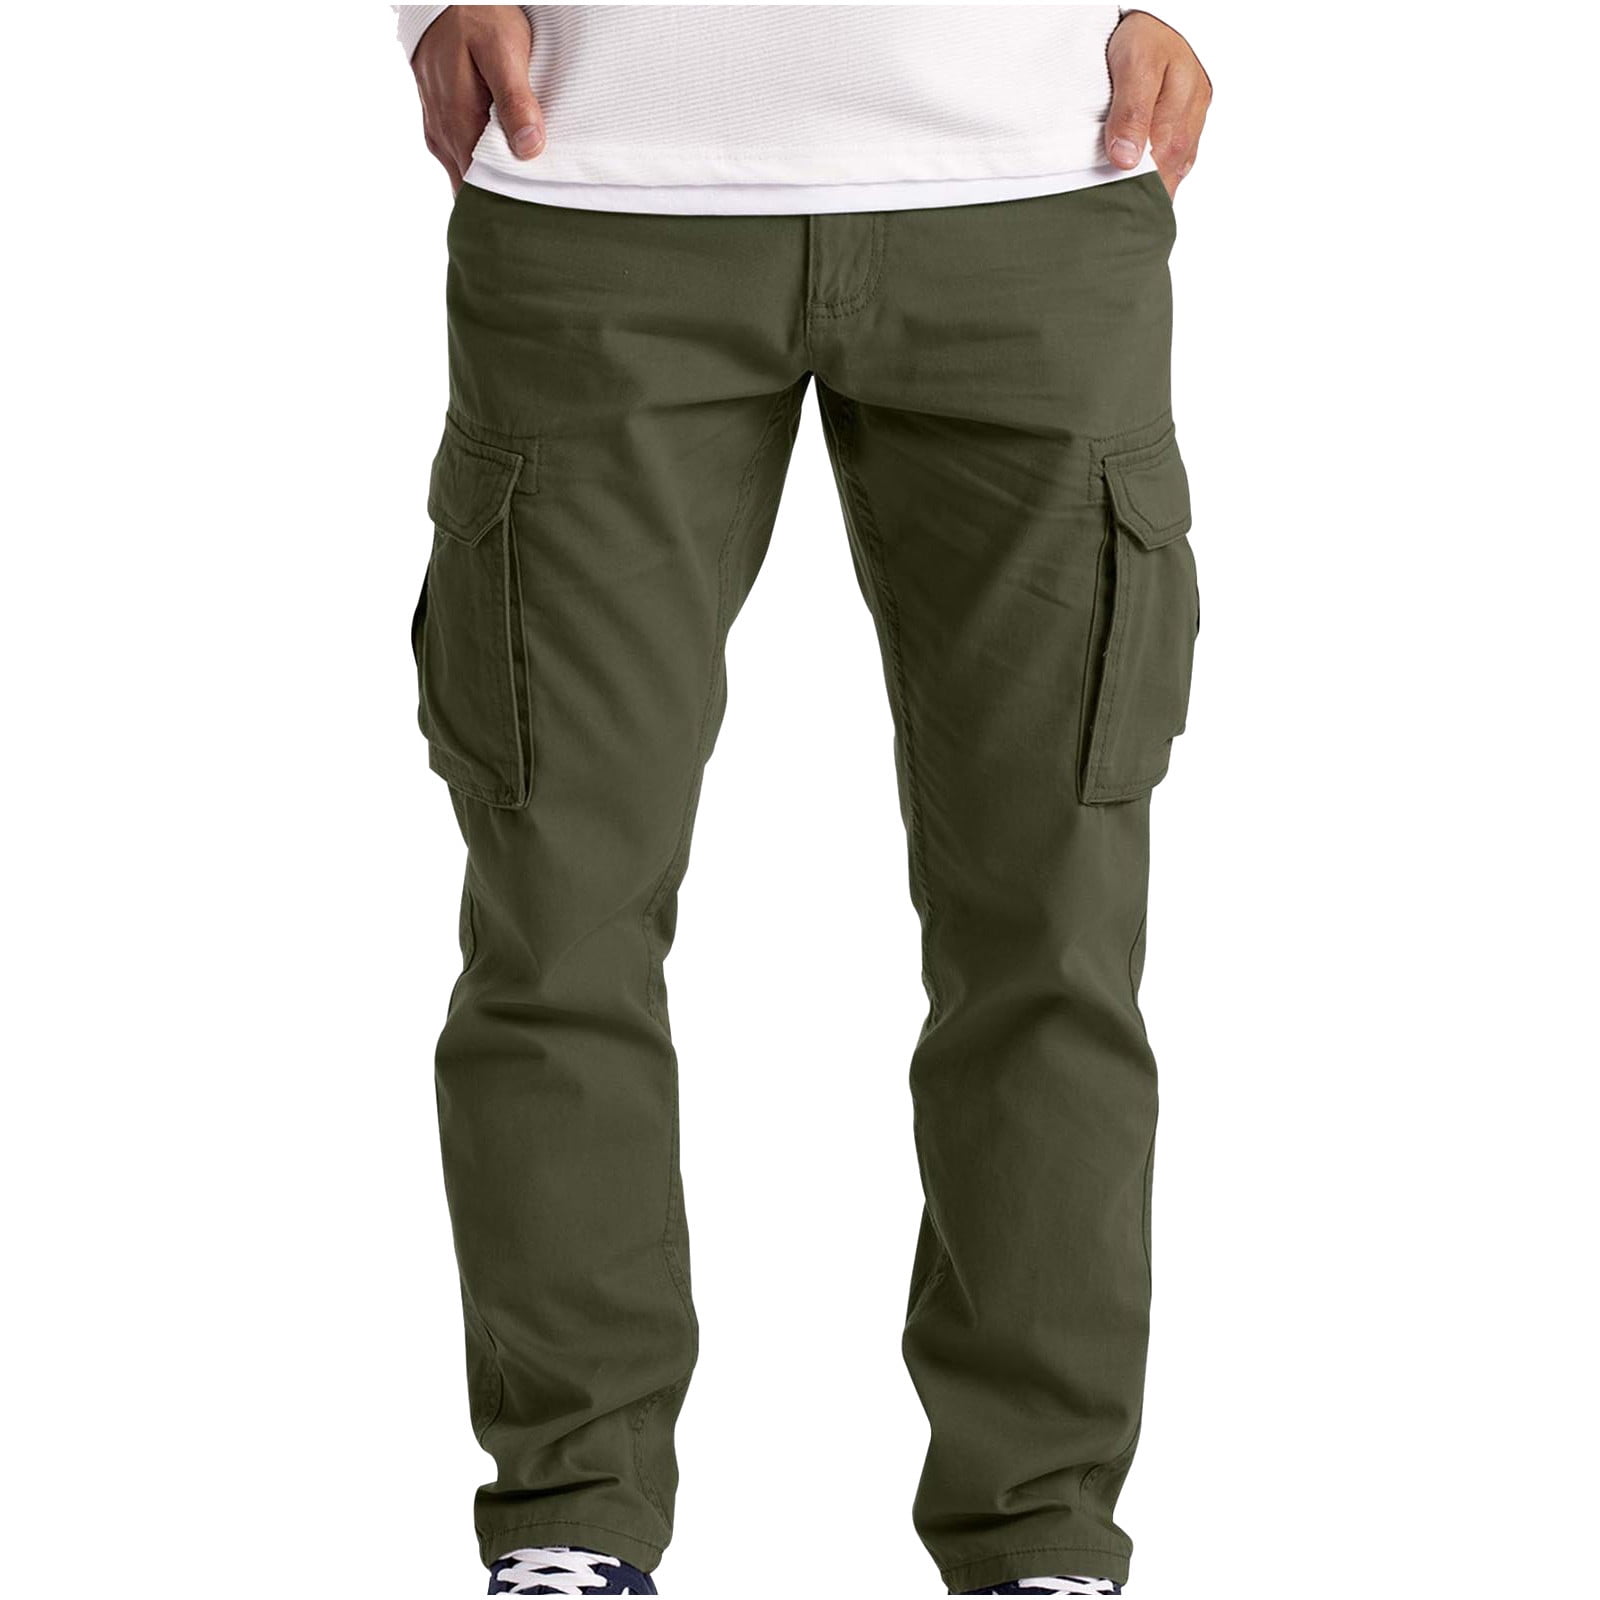  GRANBELLA Mens Cargo Pants with 6-Pockets Hiking Outdoor  Lightweight Comfortable Pants for Work Tactical : Clothing, Shoes & Jewelry